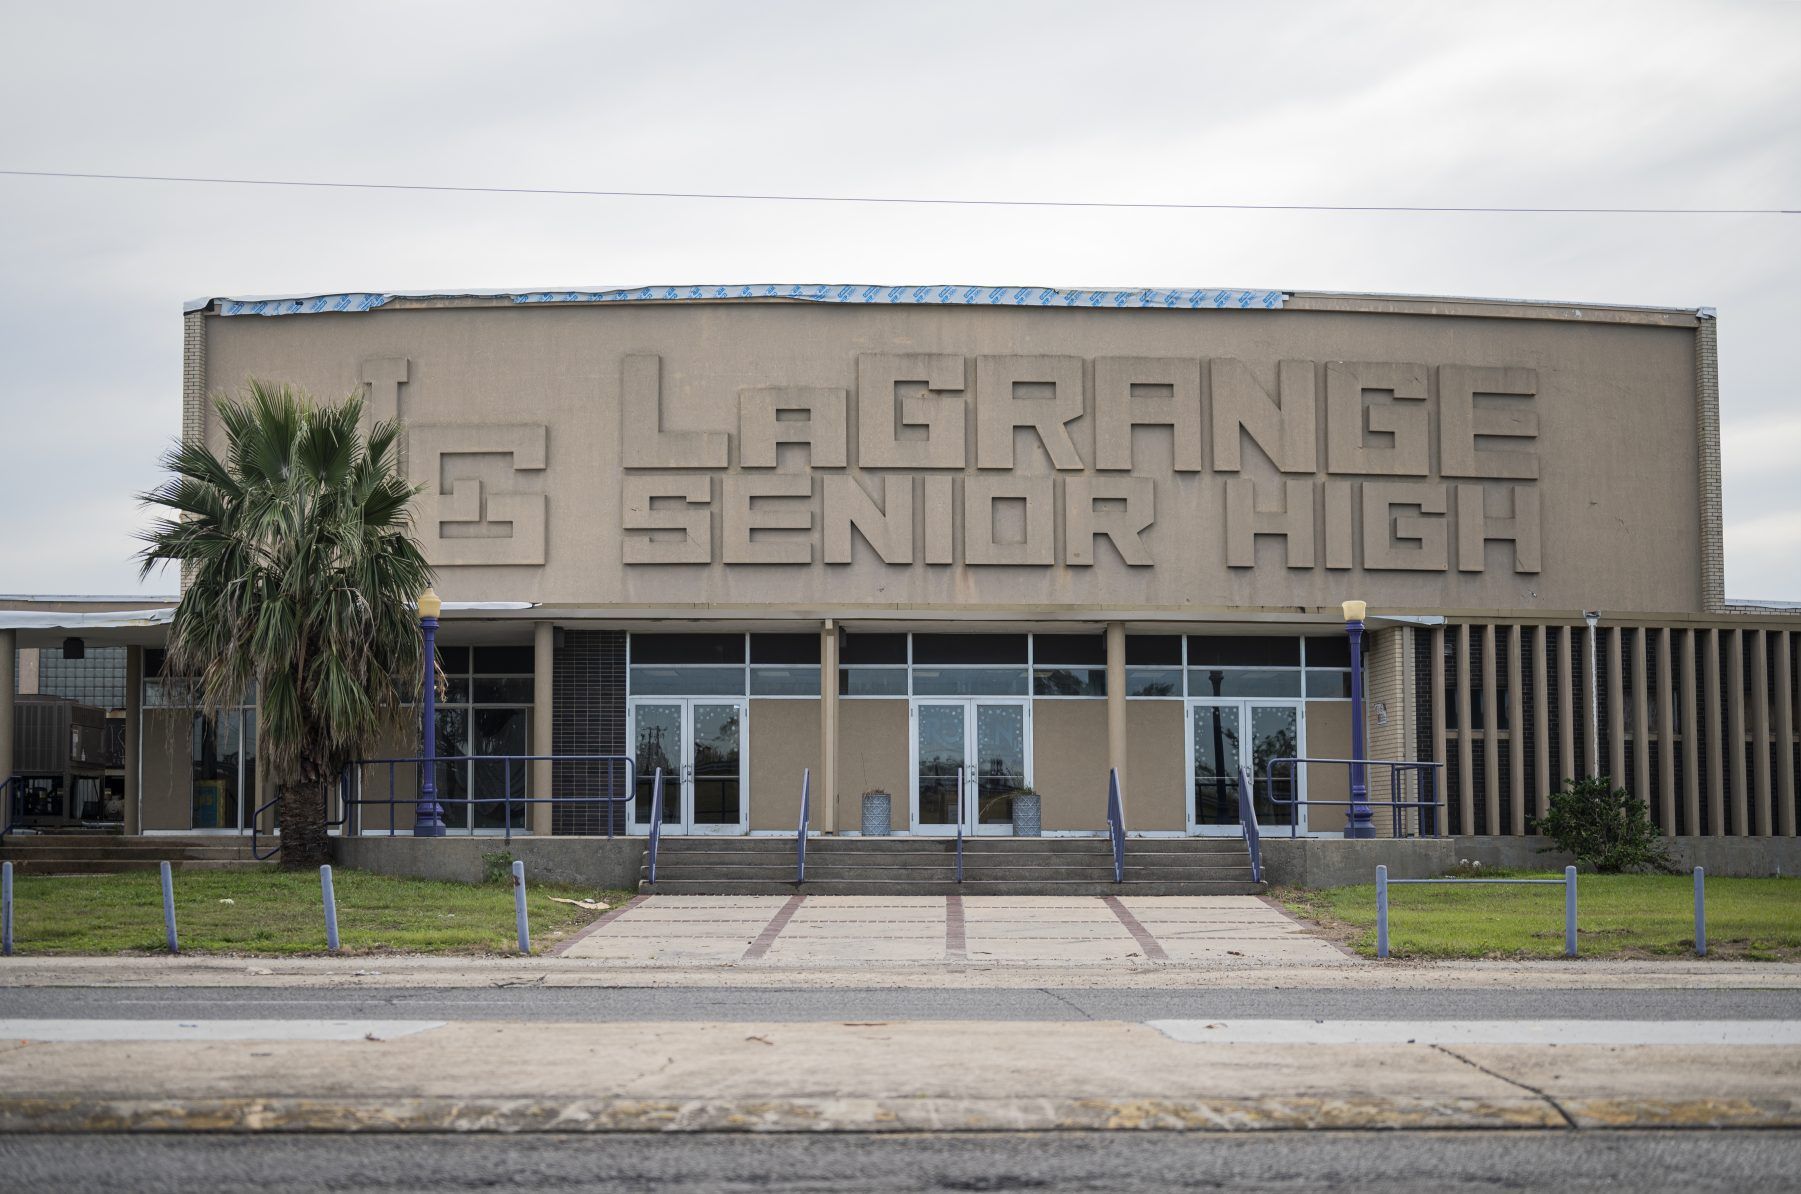 LaGrange High School remains damaged months after back-to-back Hurricanes Laura and Delta passed through the state. Many students and teachers are still displaced, living with relatives or in hotels paid for by the state. Image by Katie Sikora. United States, 2020.
